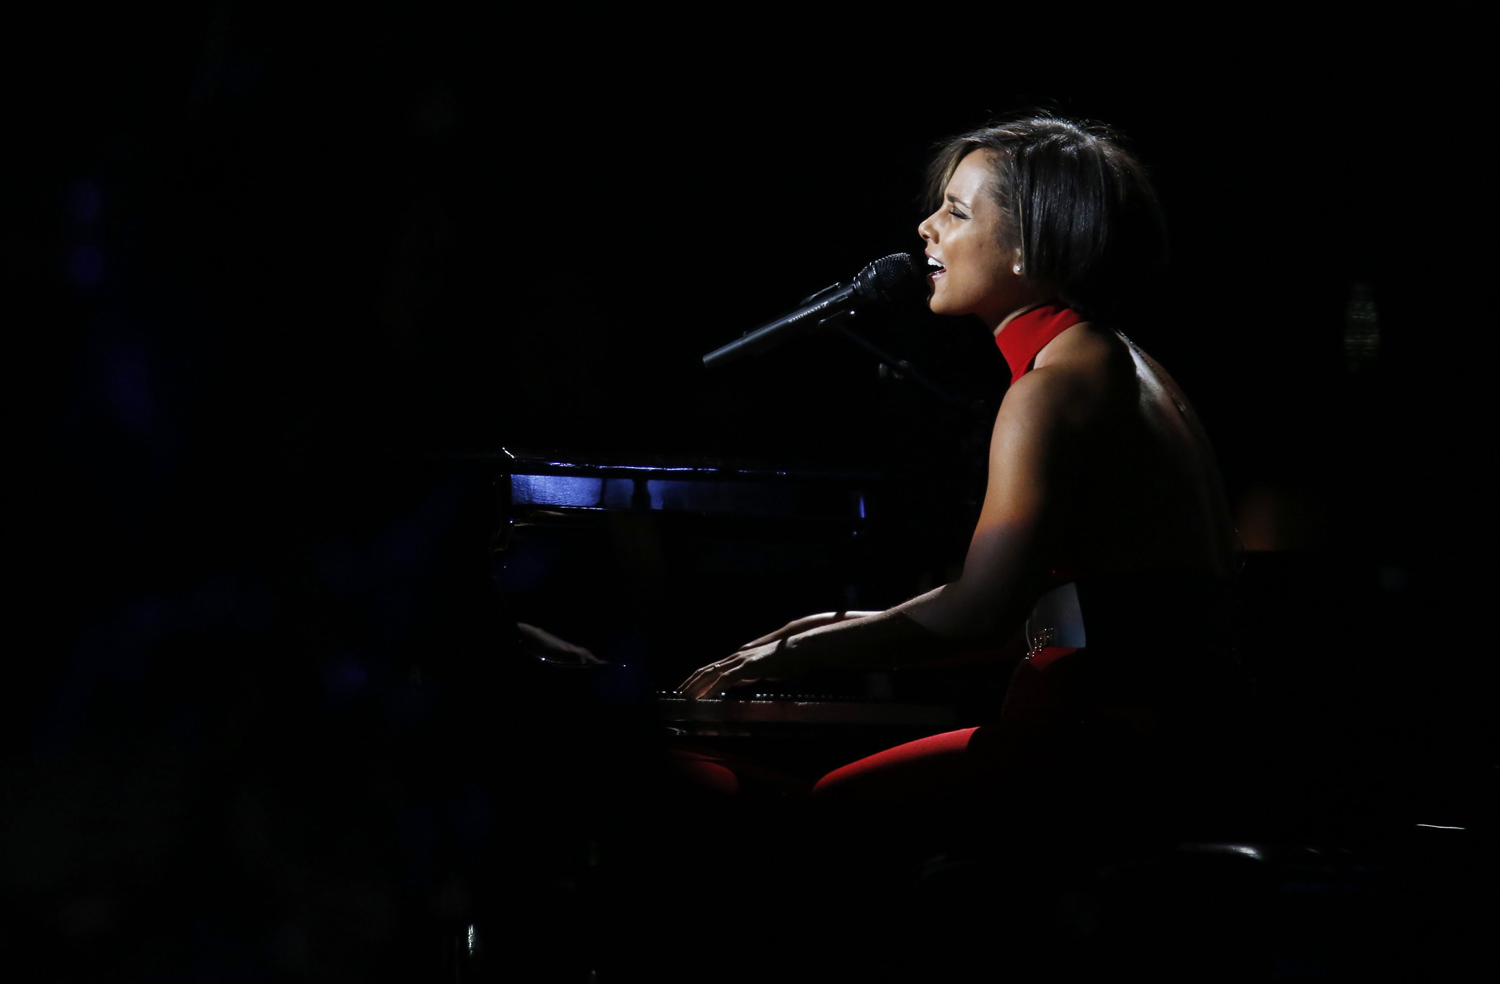 Singer Alicia Keys performs during the "12-12-12" benefit concert for victims of Superstorm Sandy at Madison Square Garden in New York